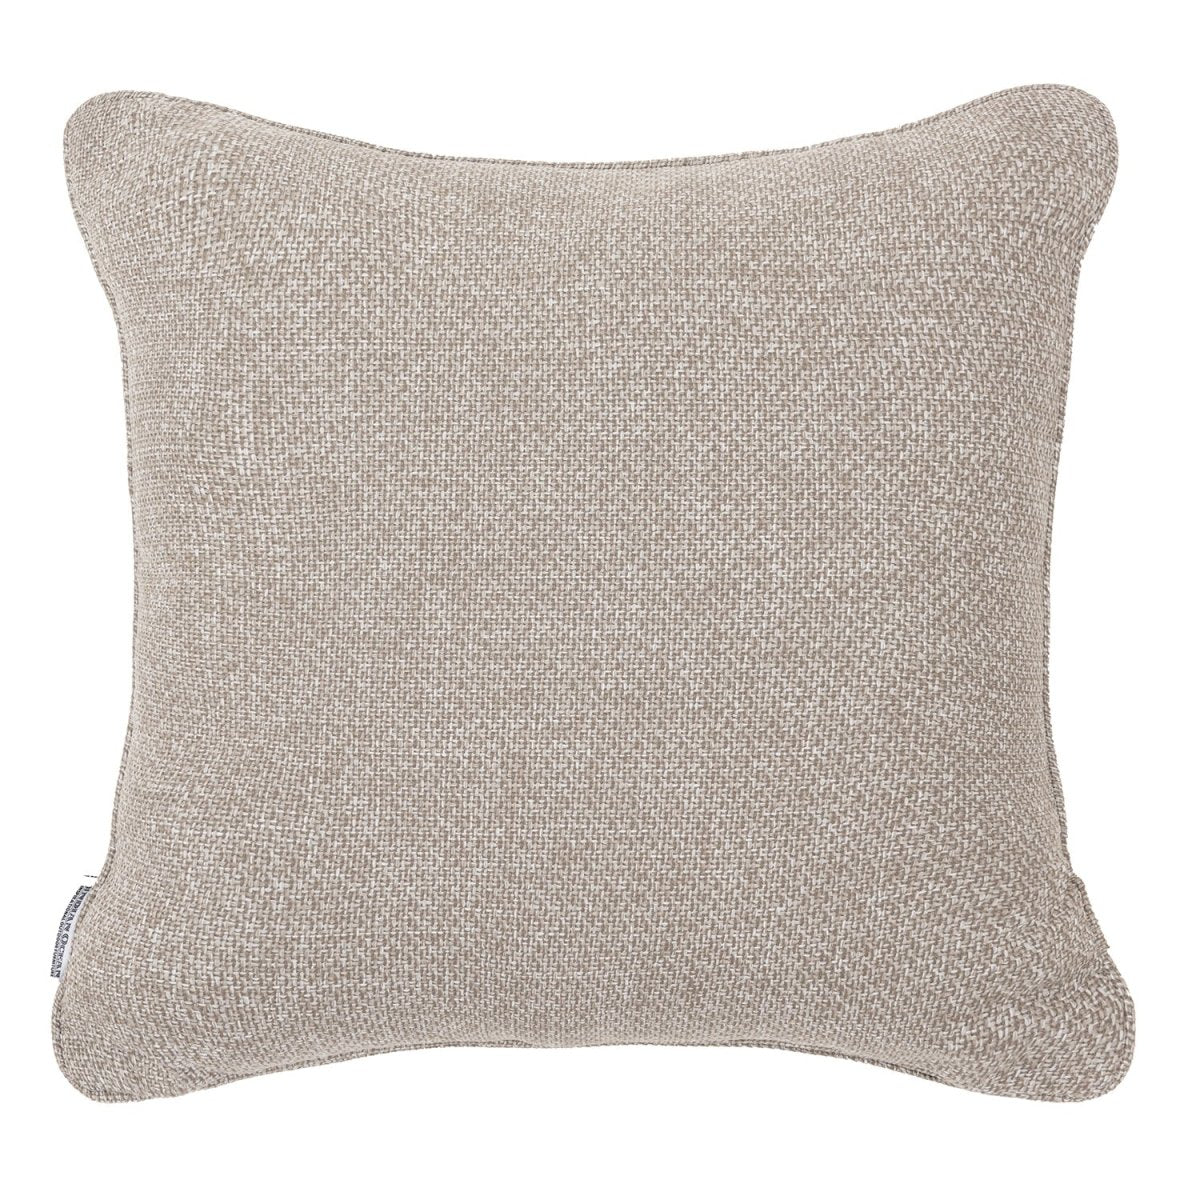 Indian Ocean Textured Scatter Cushion